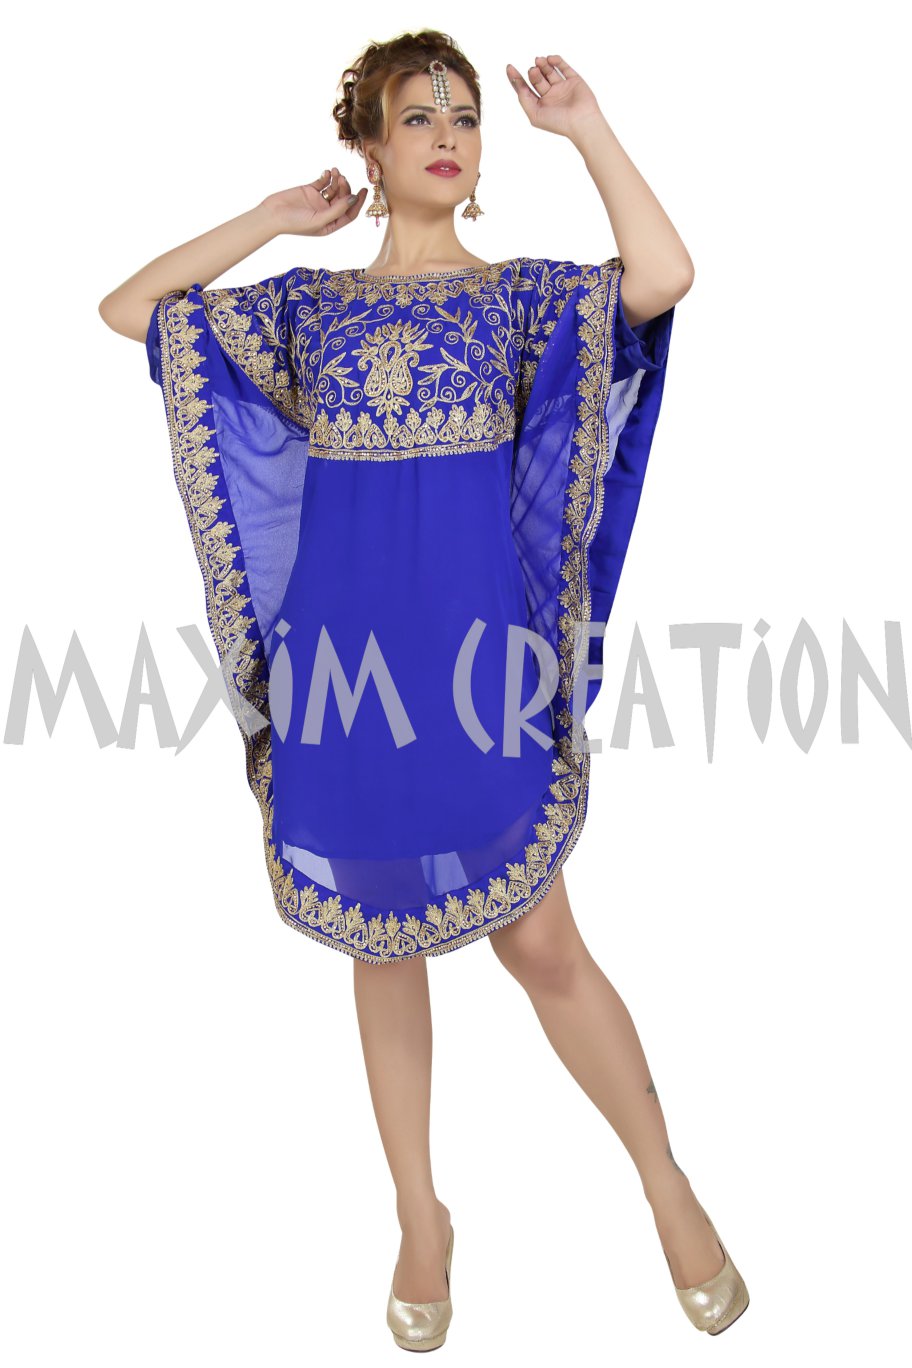 Embroidered Dress Knee Length Tunic Gown - Maxim Creation